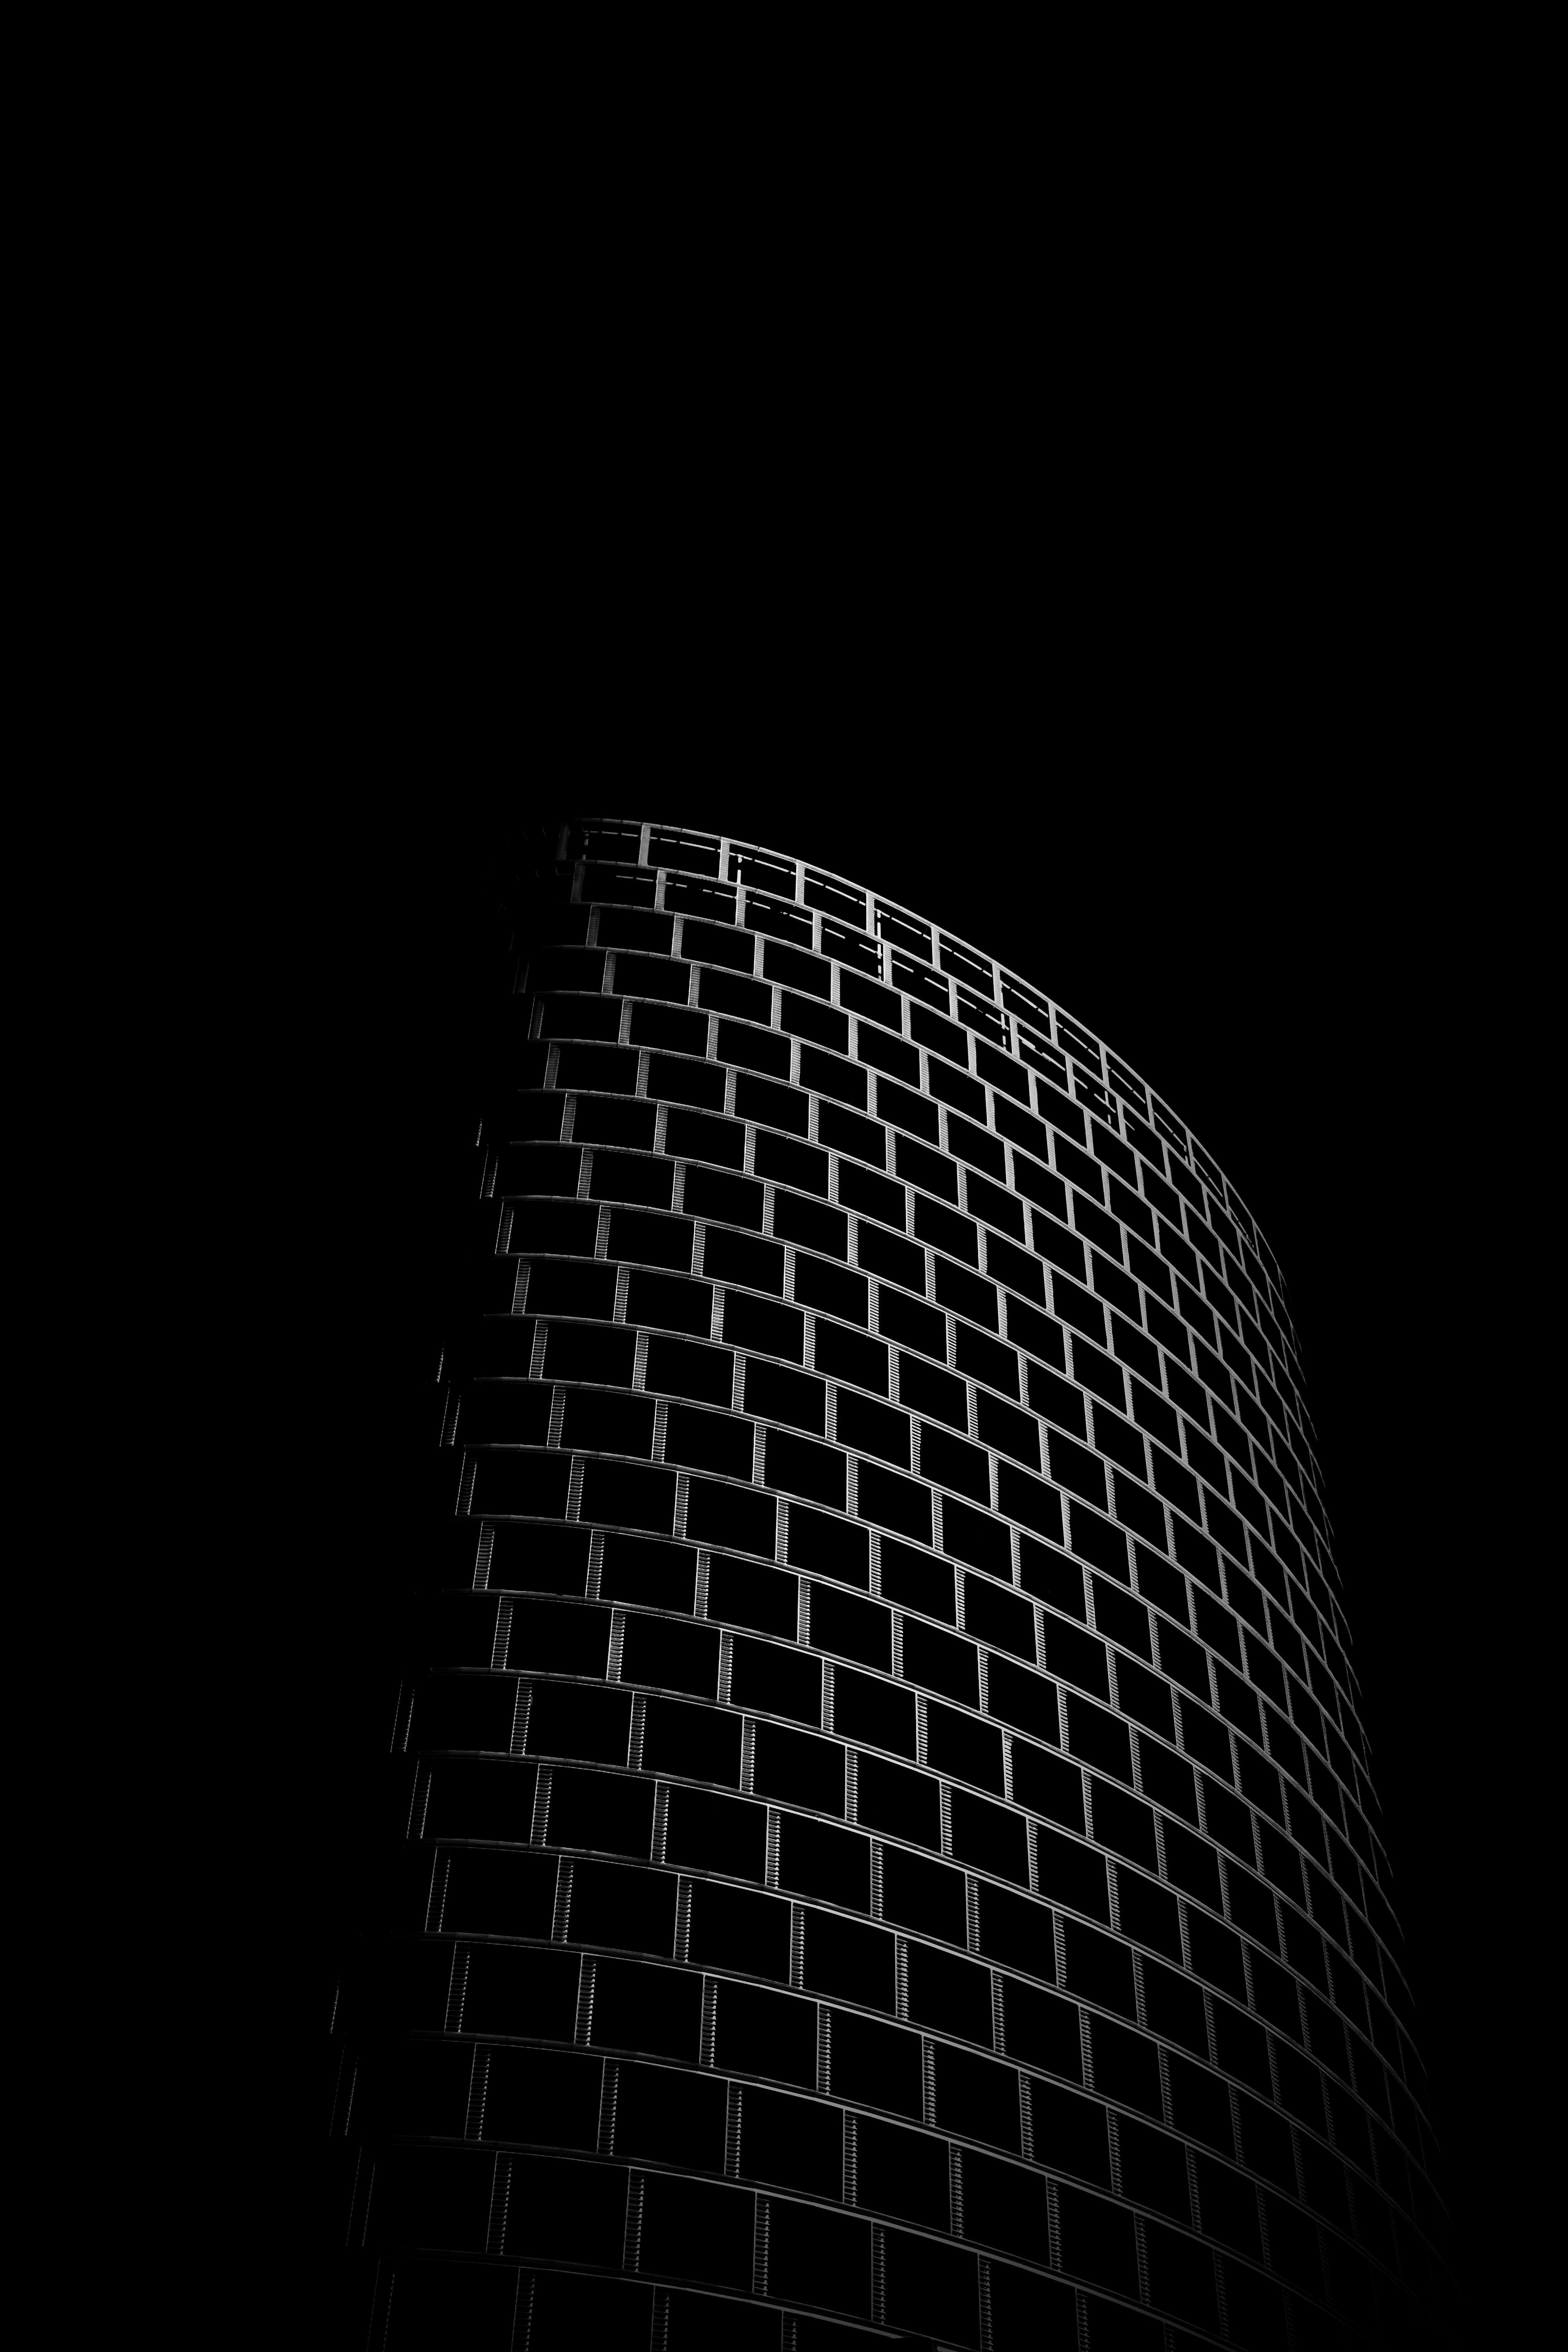 AMOLED Wallpapers [Free Download!]